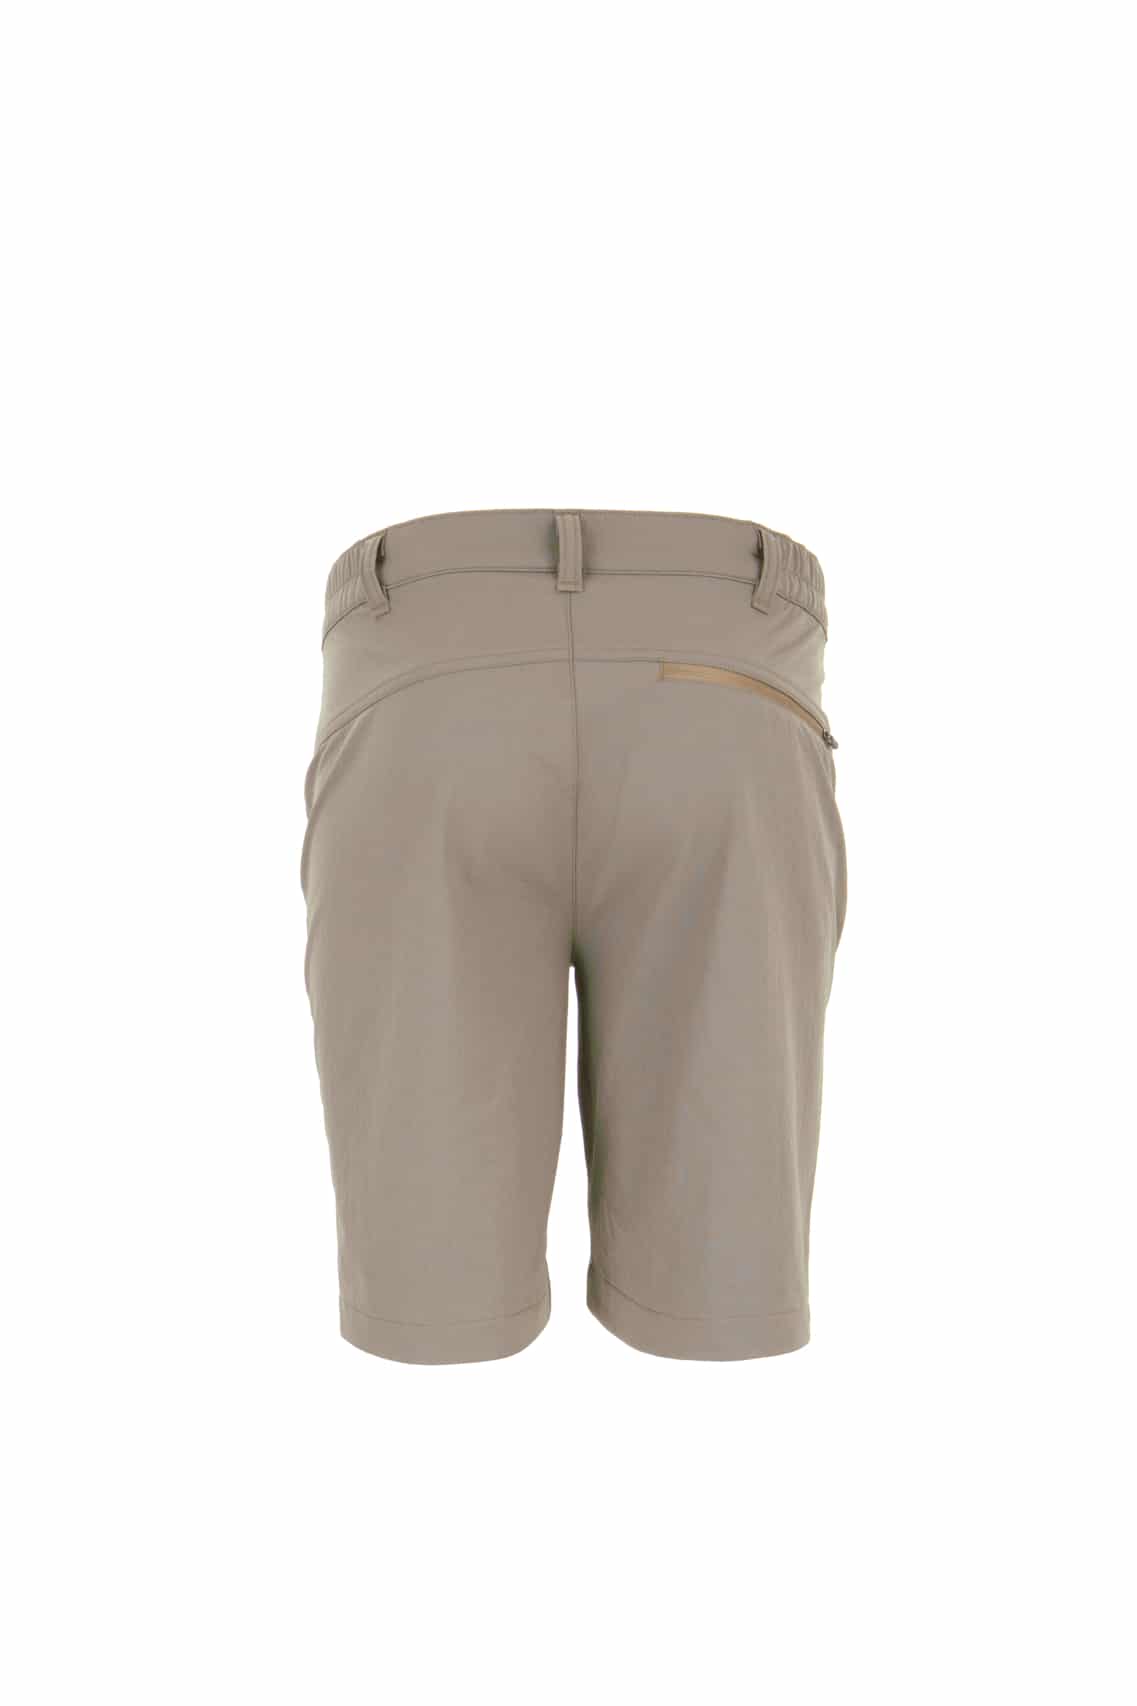 photo of Silverpoint mens ennerdale shorts sand rear